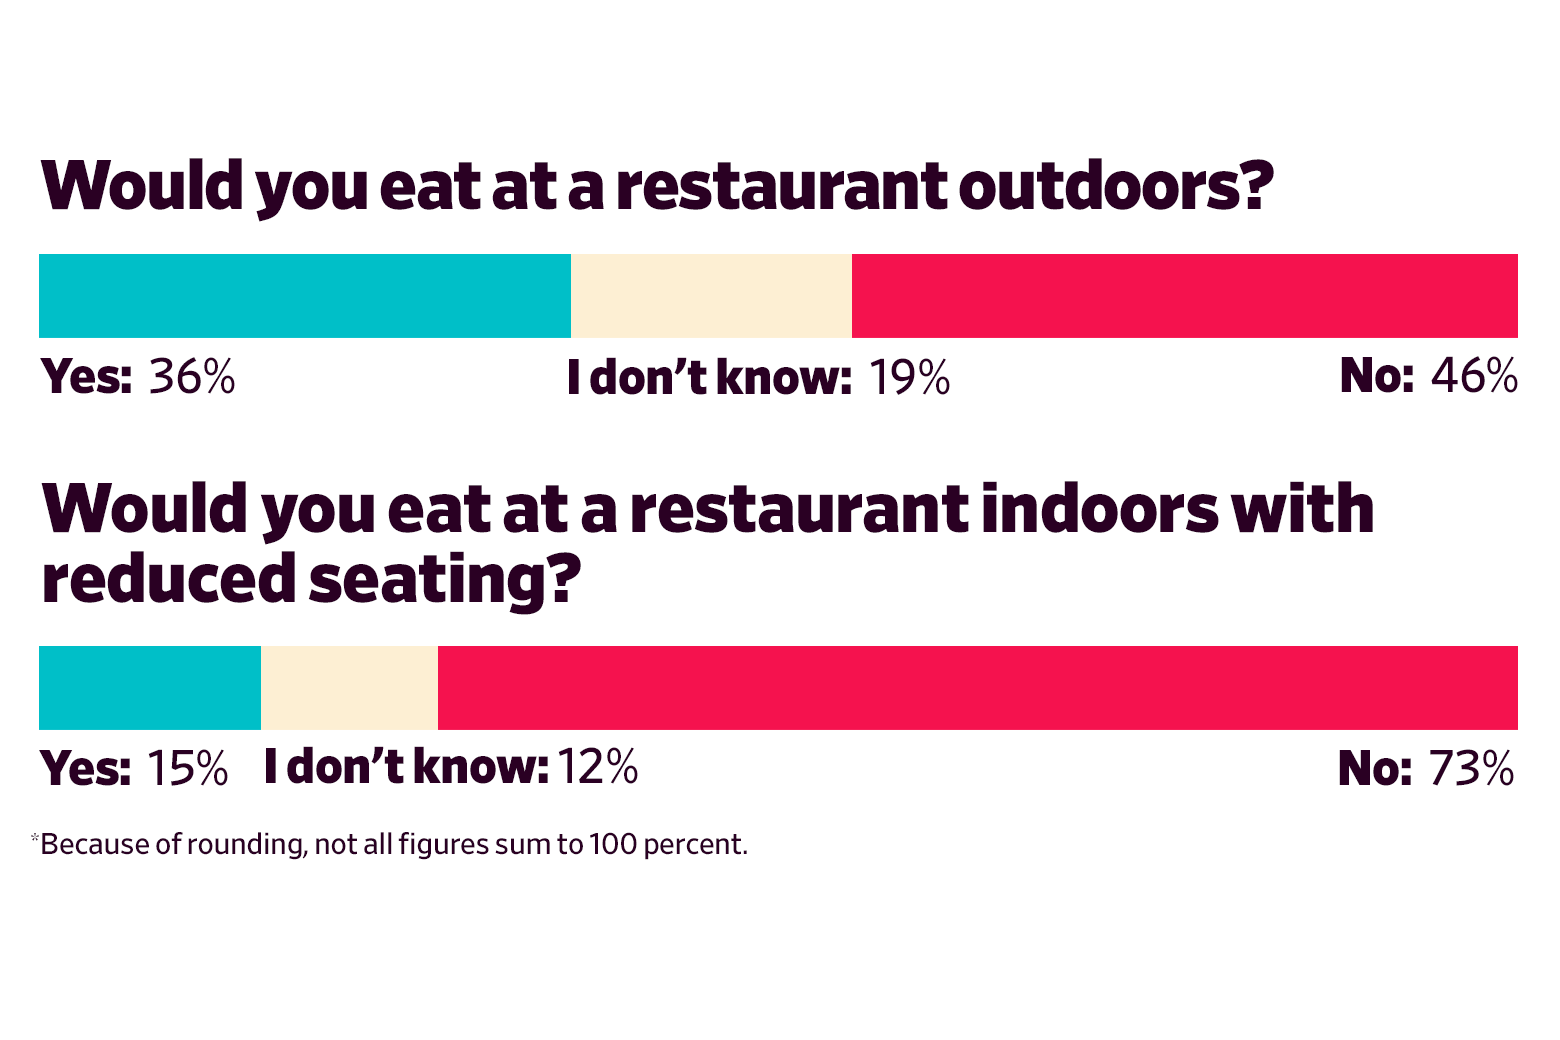 Would you eat at a restaurant outdoors? Yes: 36 I don’t know: 19 No: 46  Would you eat at a restaurant indoors with reduced seating? Yes: 15 I don’t know:  12 No: 73